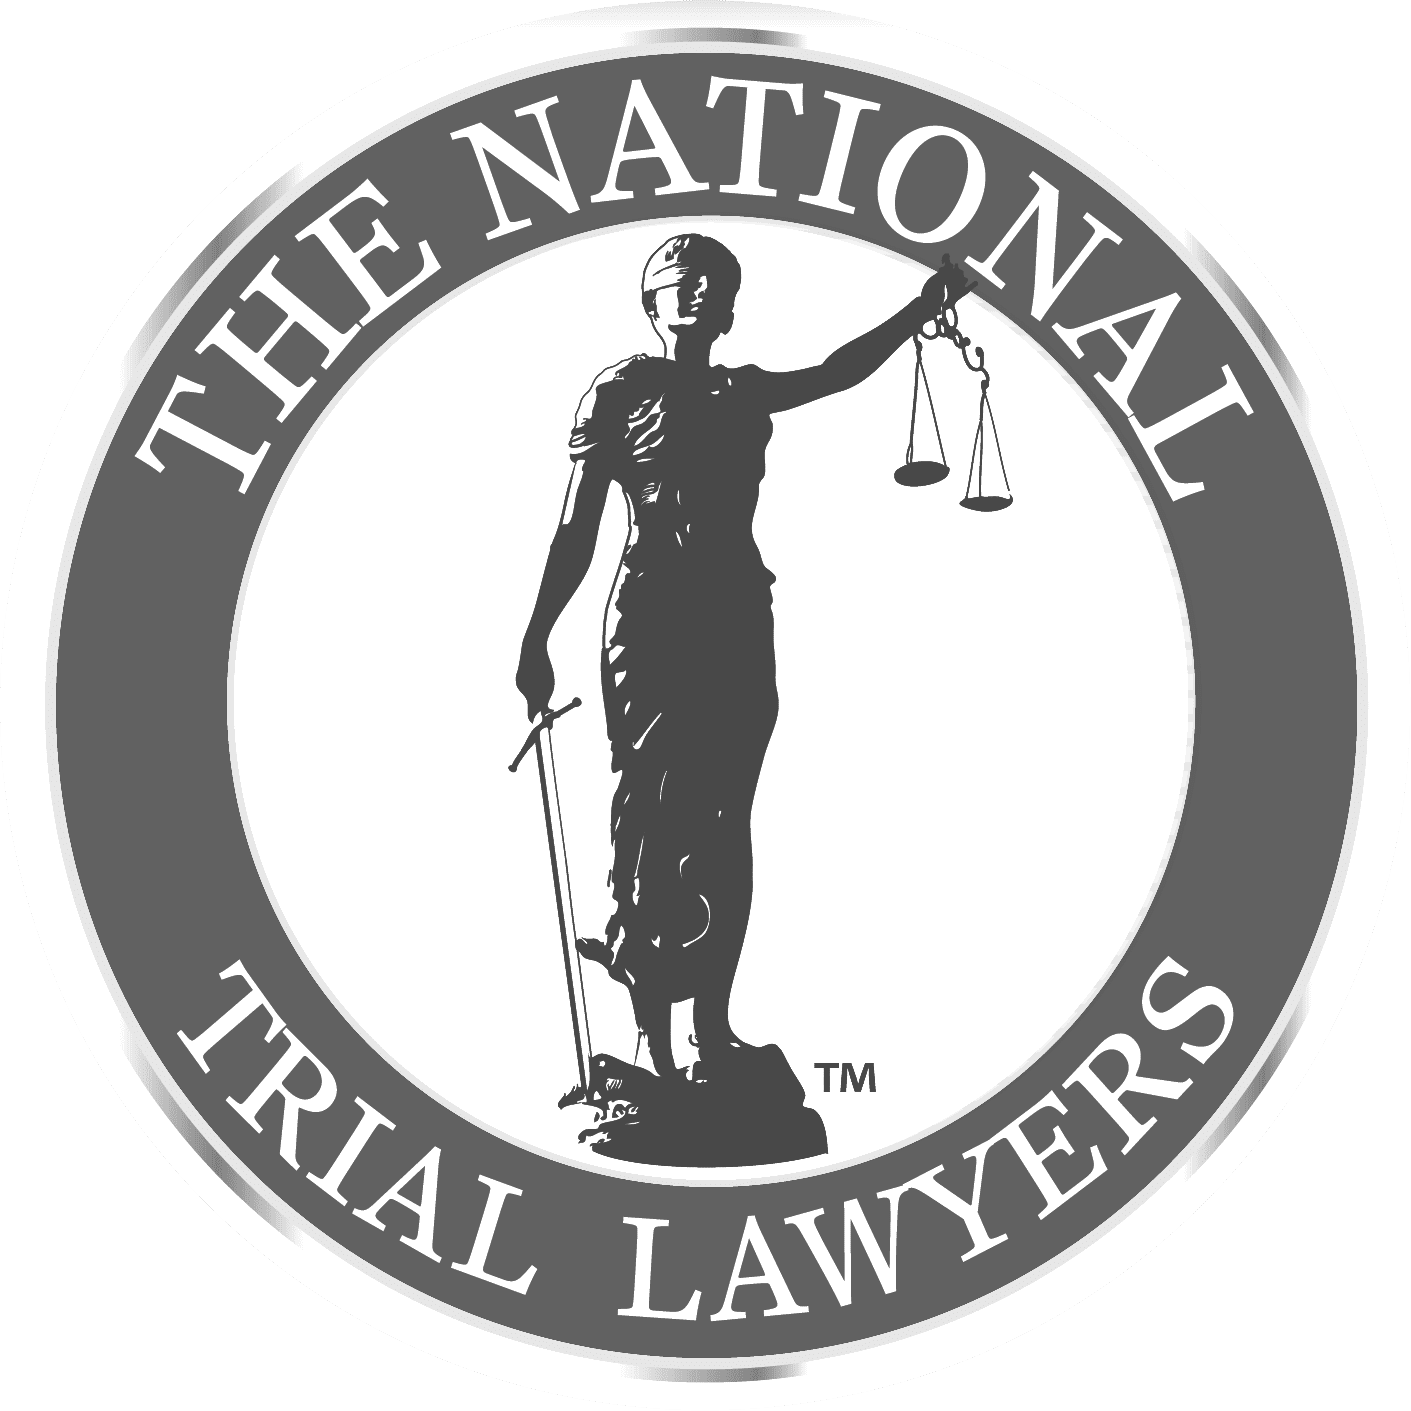 The National Trial Lawyers Badge